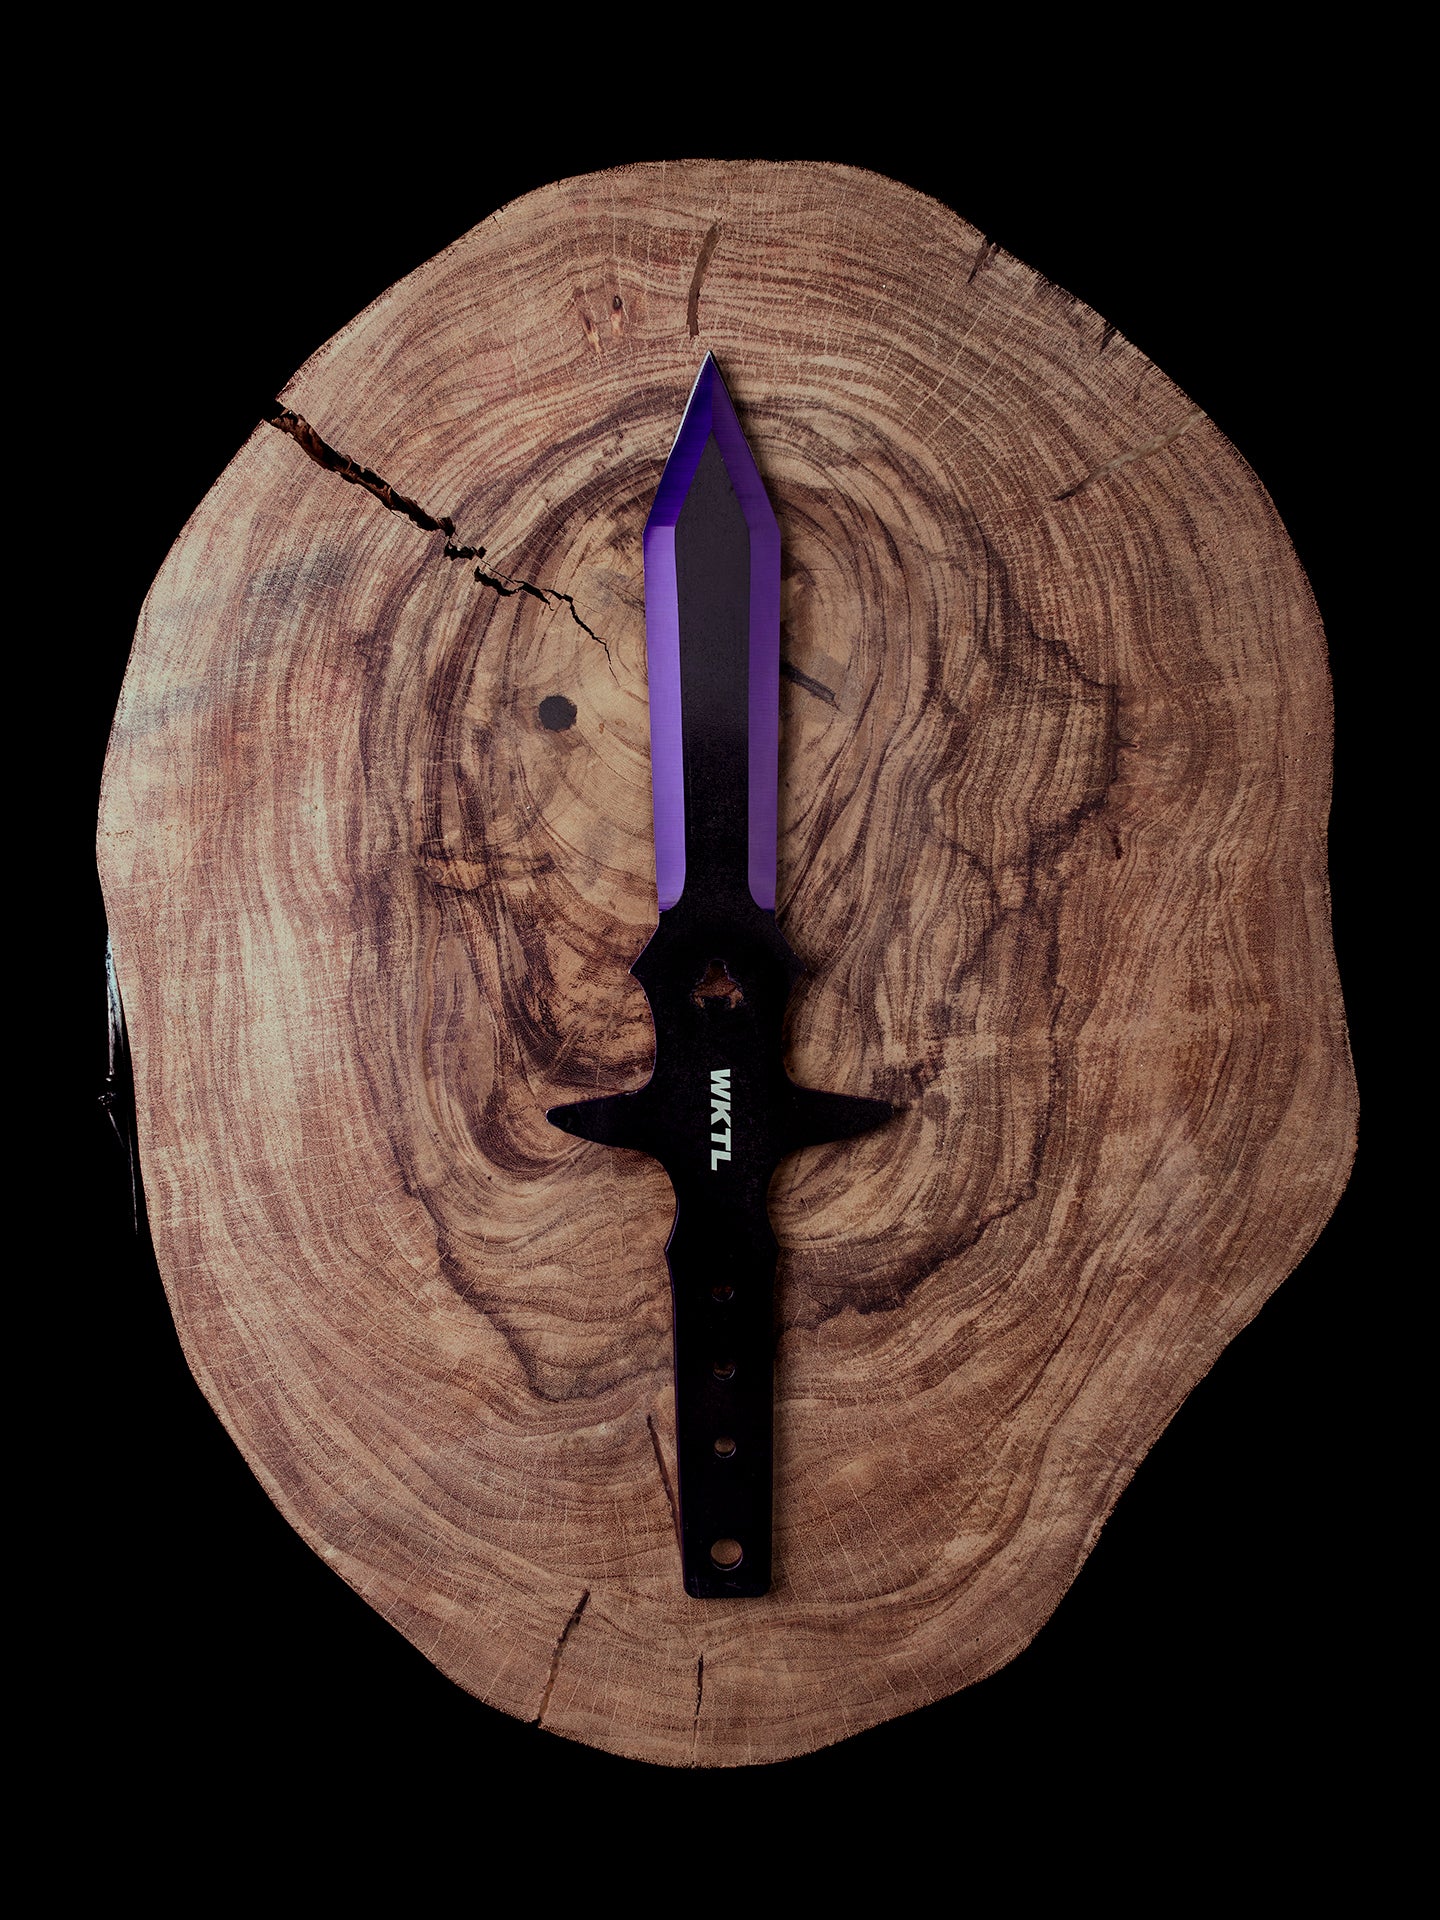 World Knife Throwing League (WKTL) Certified Toro Competition Throwing Knife, The Barbaro